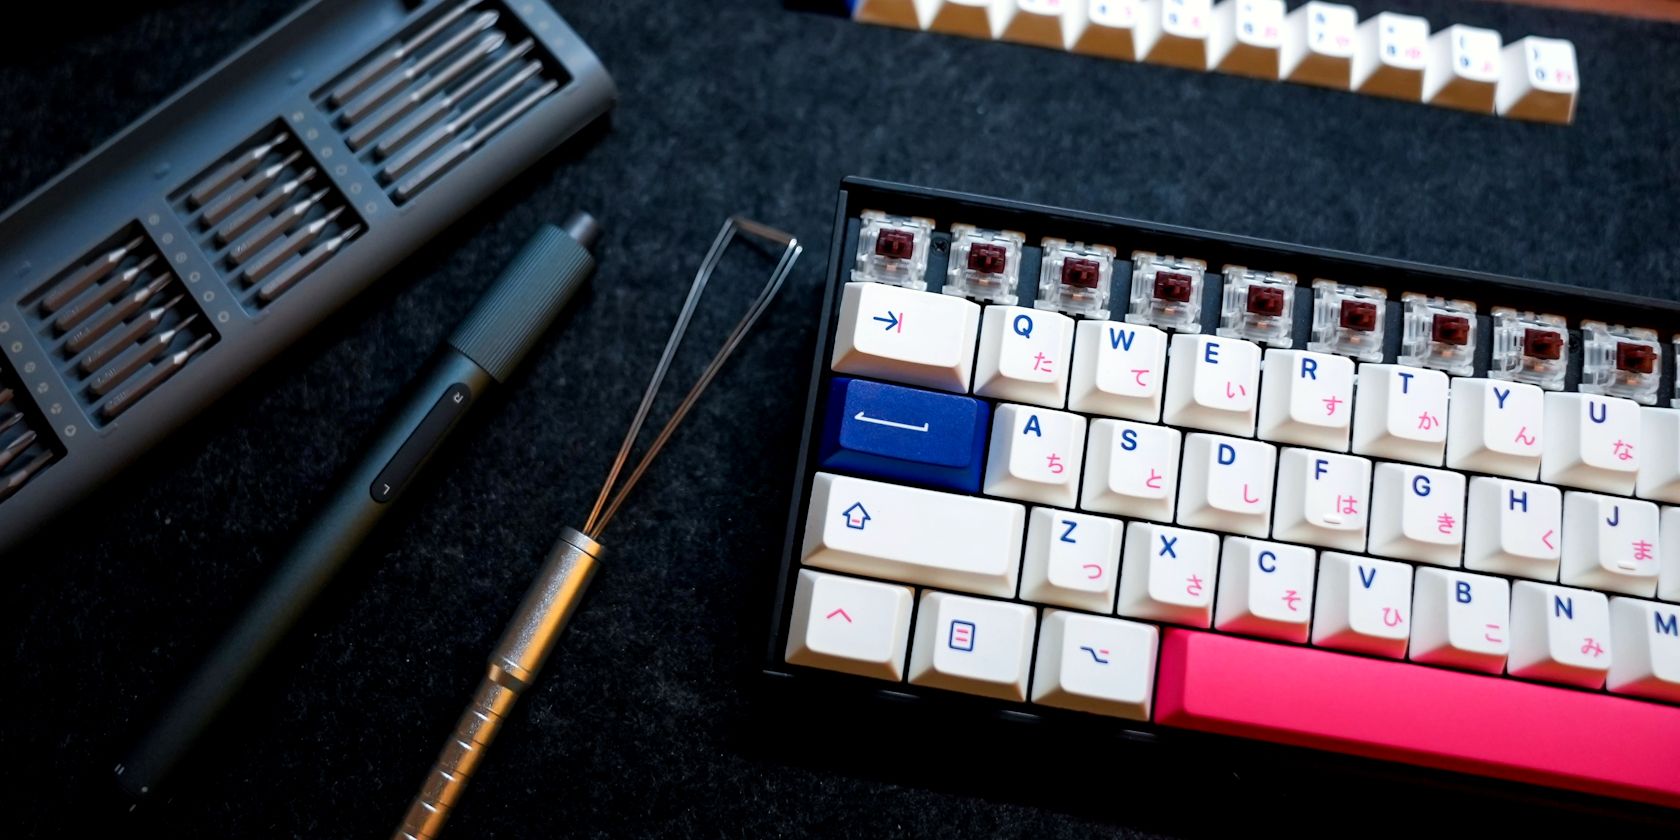 mechanical keyboard showing switches and key puller feature